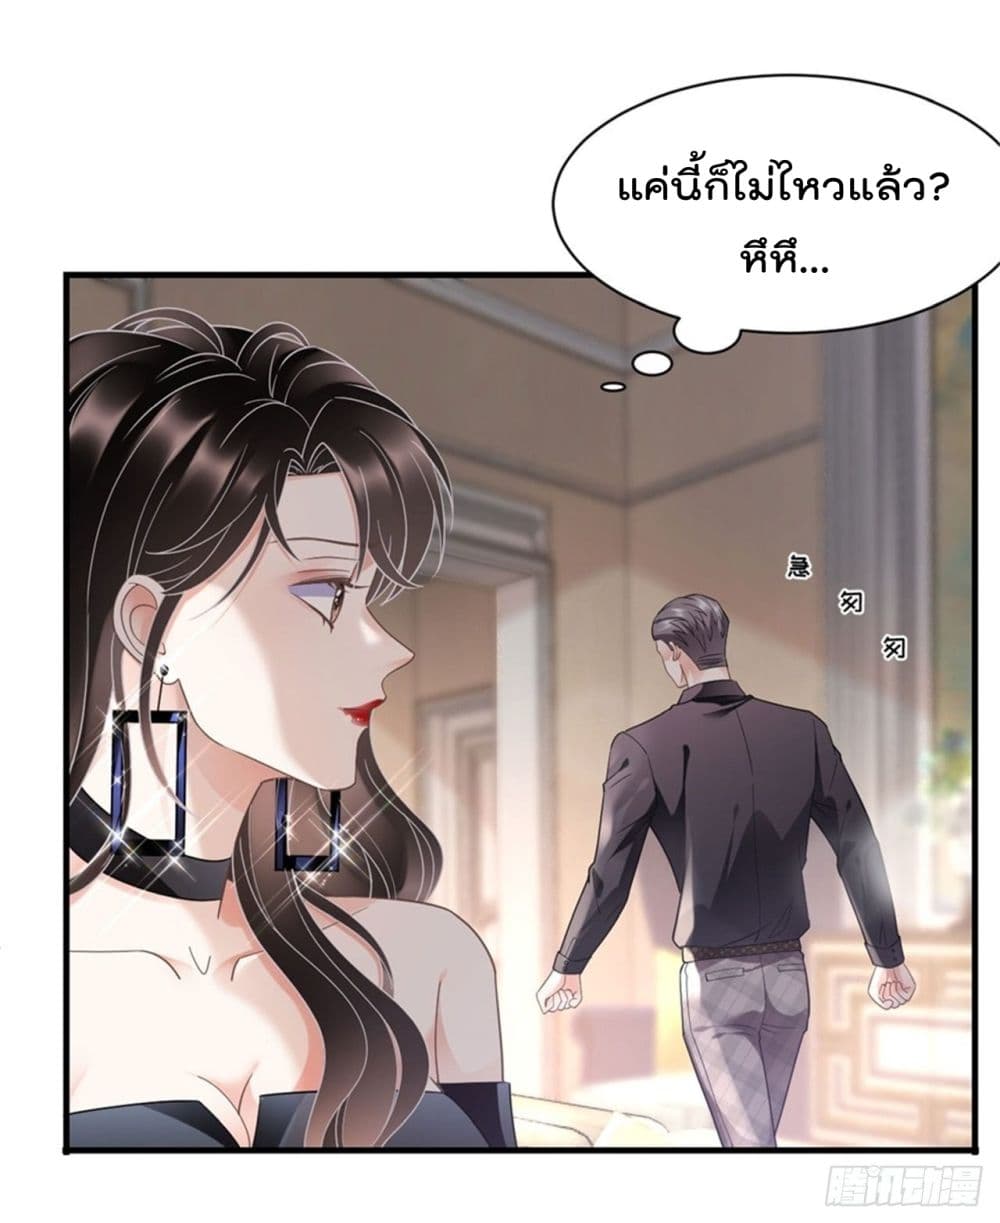 What Can the Eldest Lady Have คุณหนูใหญ่ ทำไมคุณร้ายอย่างนี้ 8-8